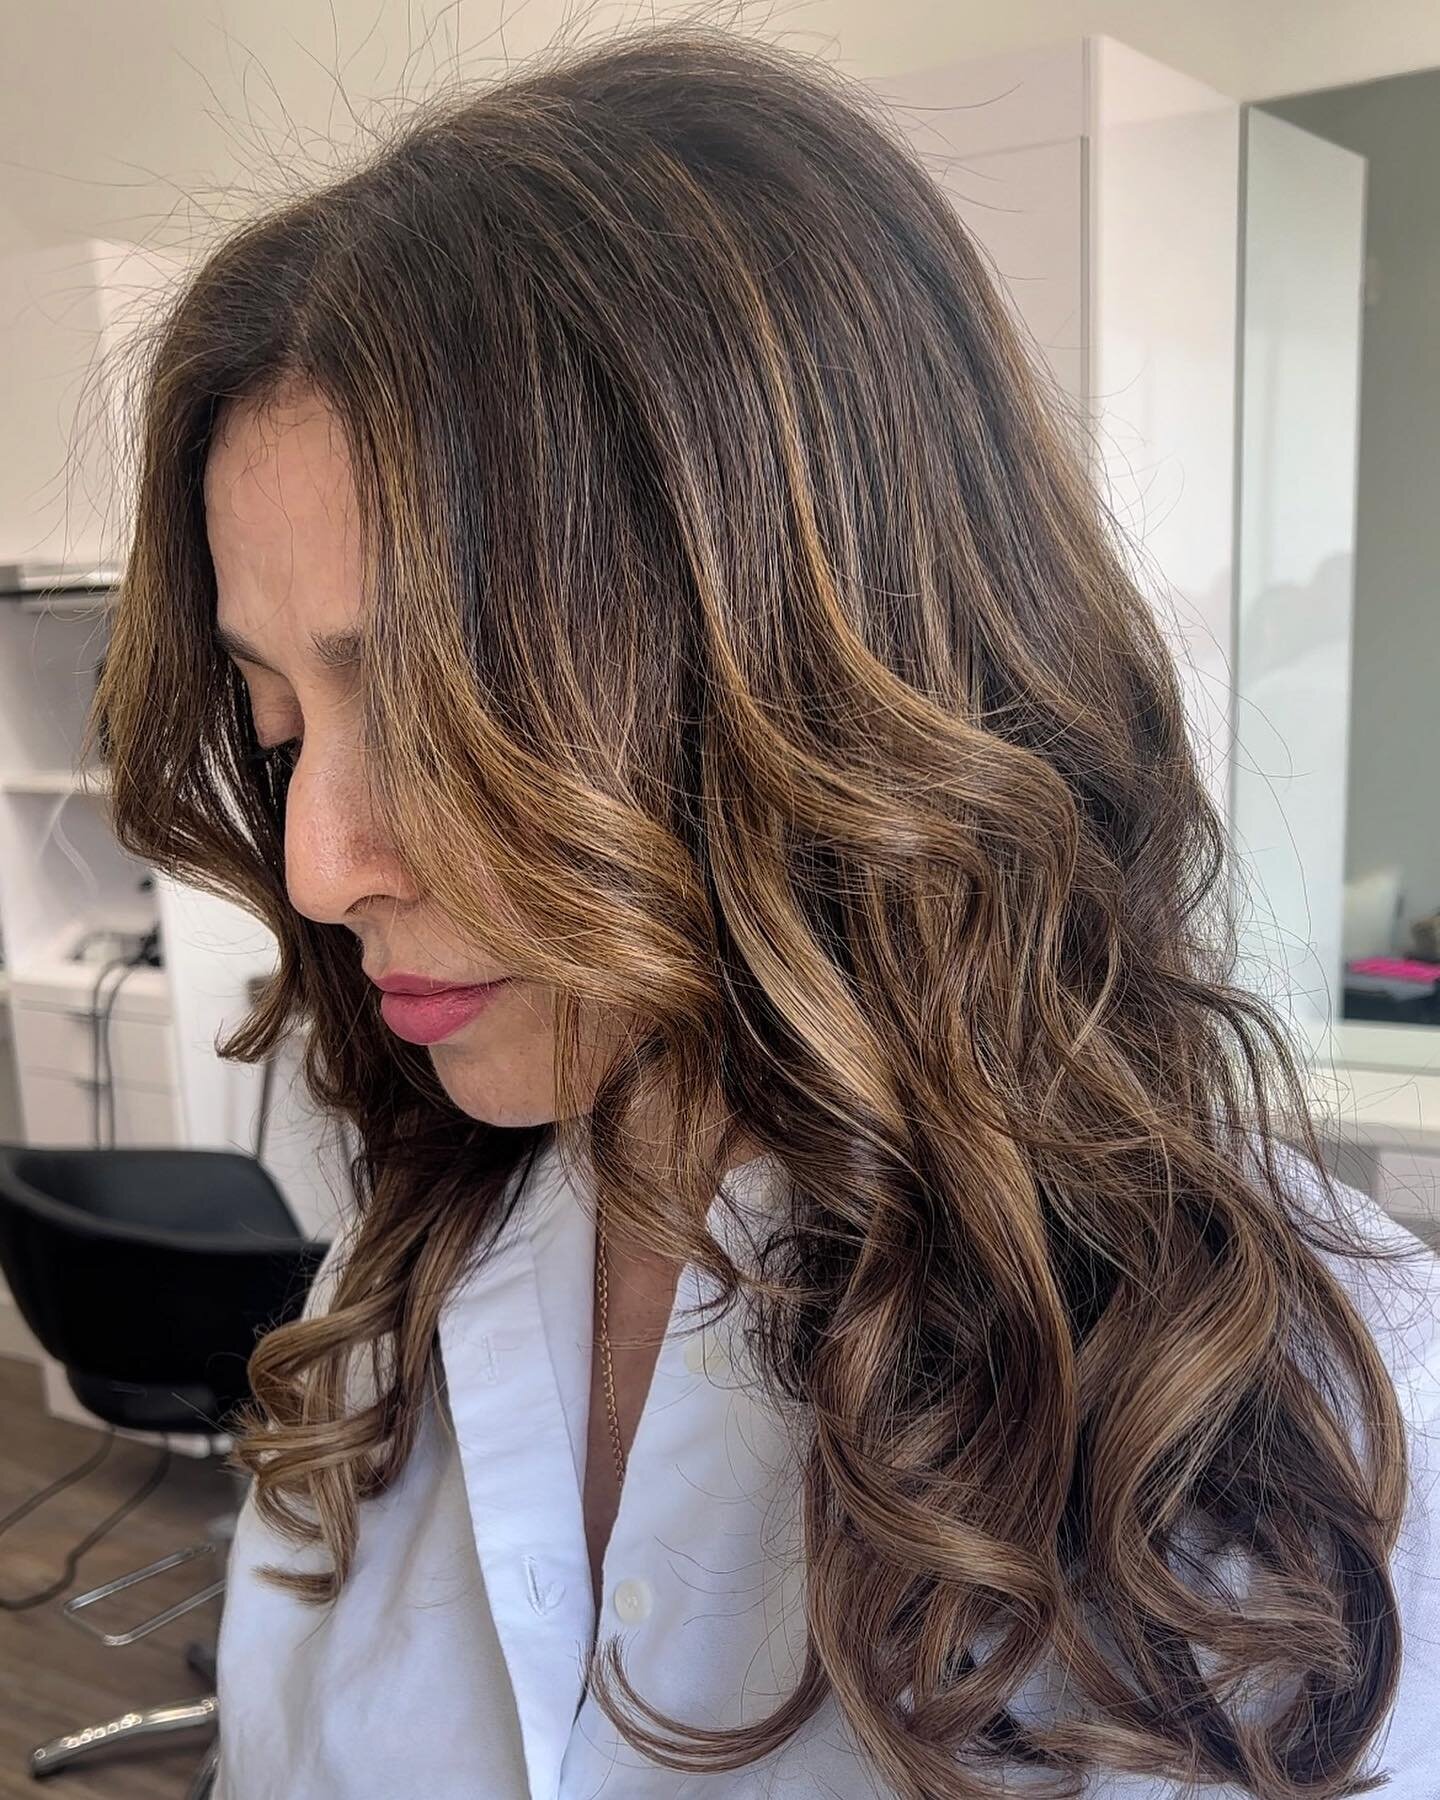 Ready for a hair transformation? Our expert colorists can take your locks to the next level with a custom color that perfectly complements your skin tone. And for those looking for extra length or volume, our high-quality extensions are the perfect s